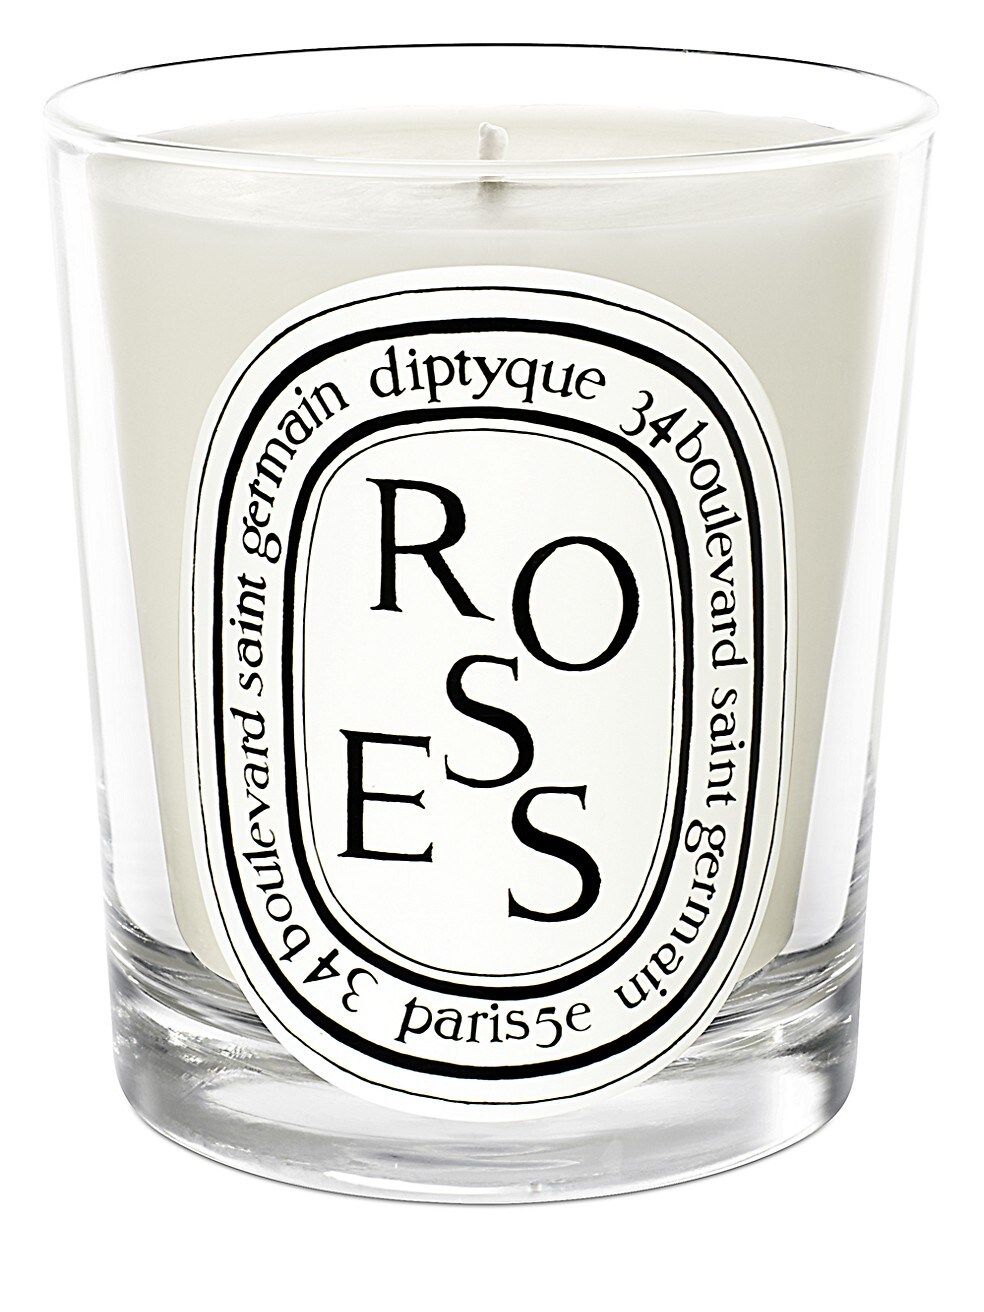 Roses Candle | Saks Fifth Avenue